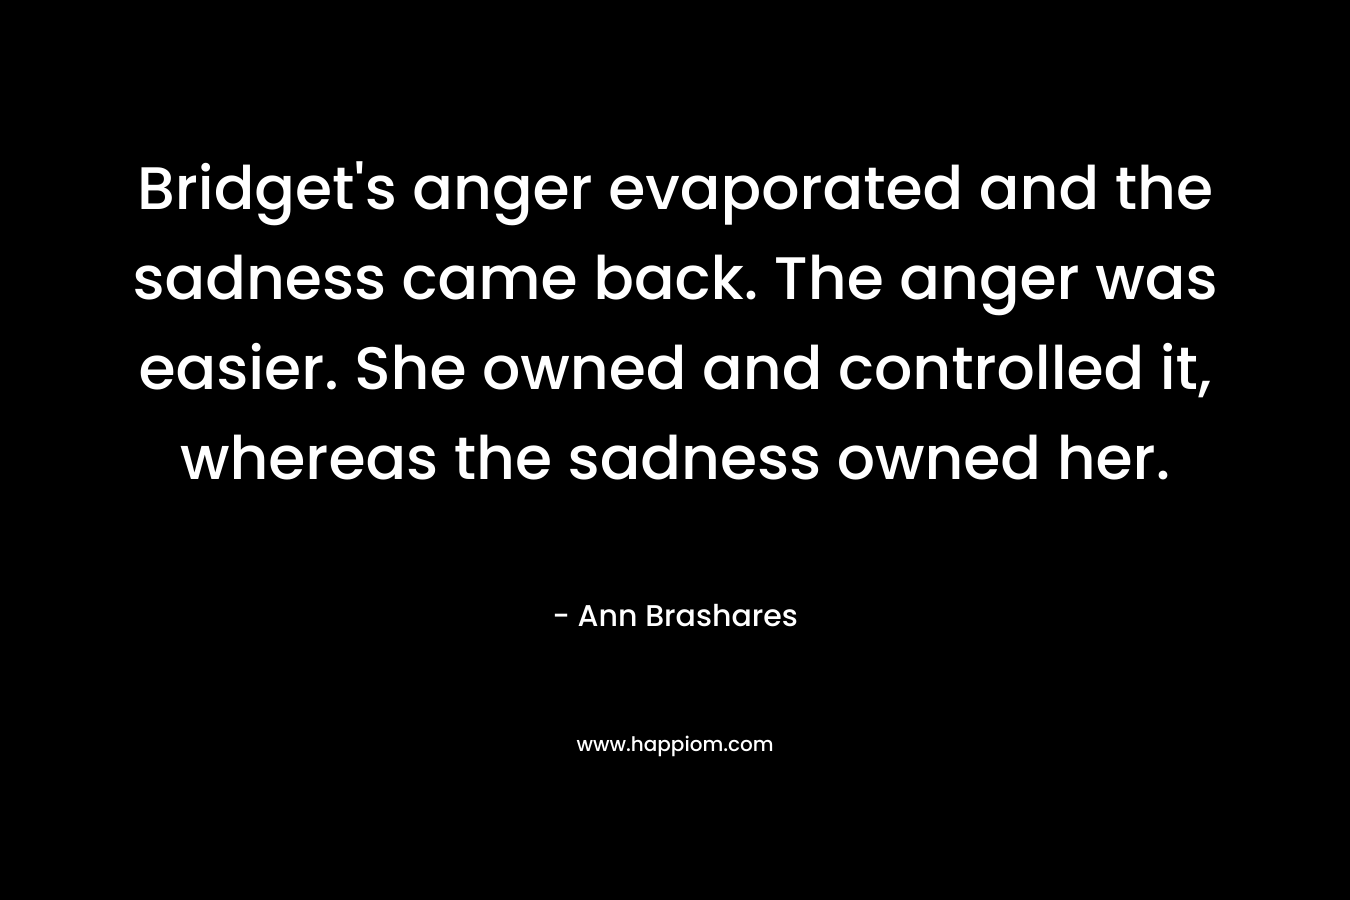 Bridget’s anger evaporated and the sadness came back. The anger was easier. She owned and controlled it, whereas the sadness owned her. – Ann Brashares